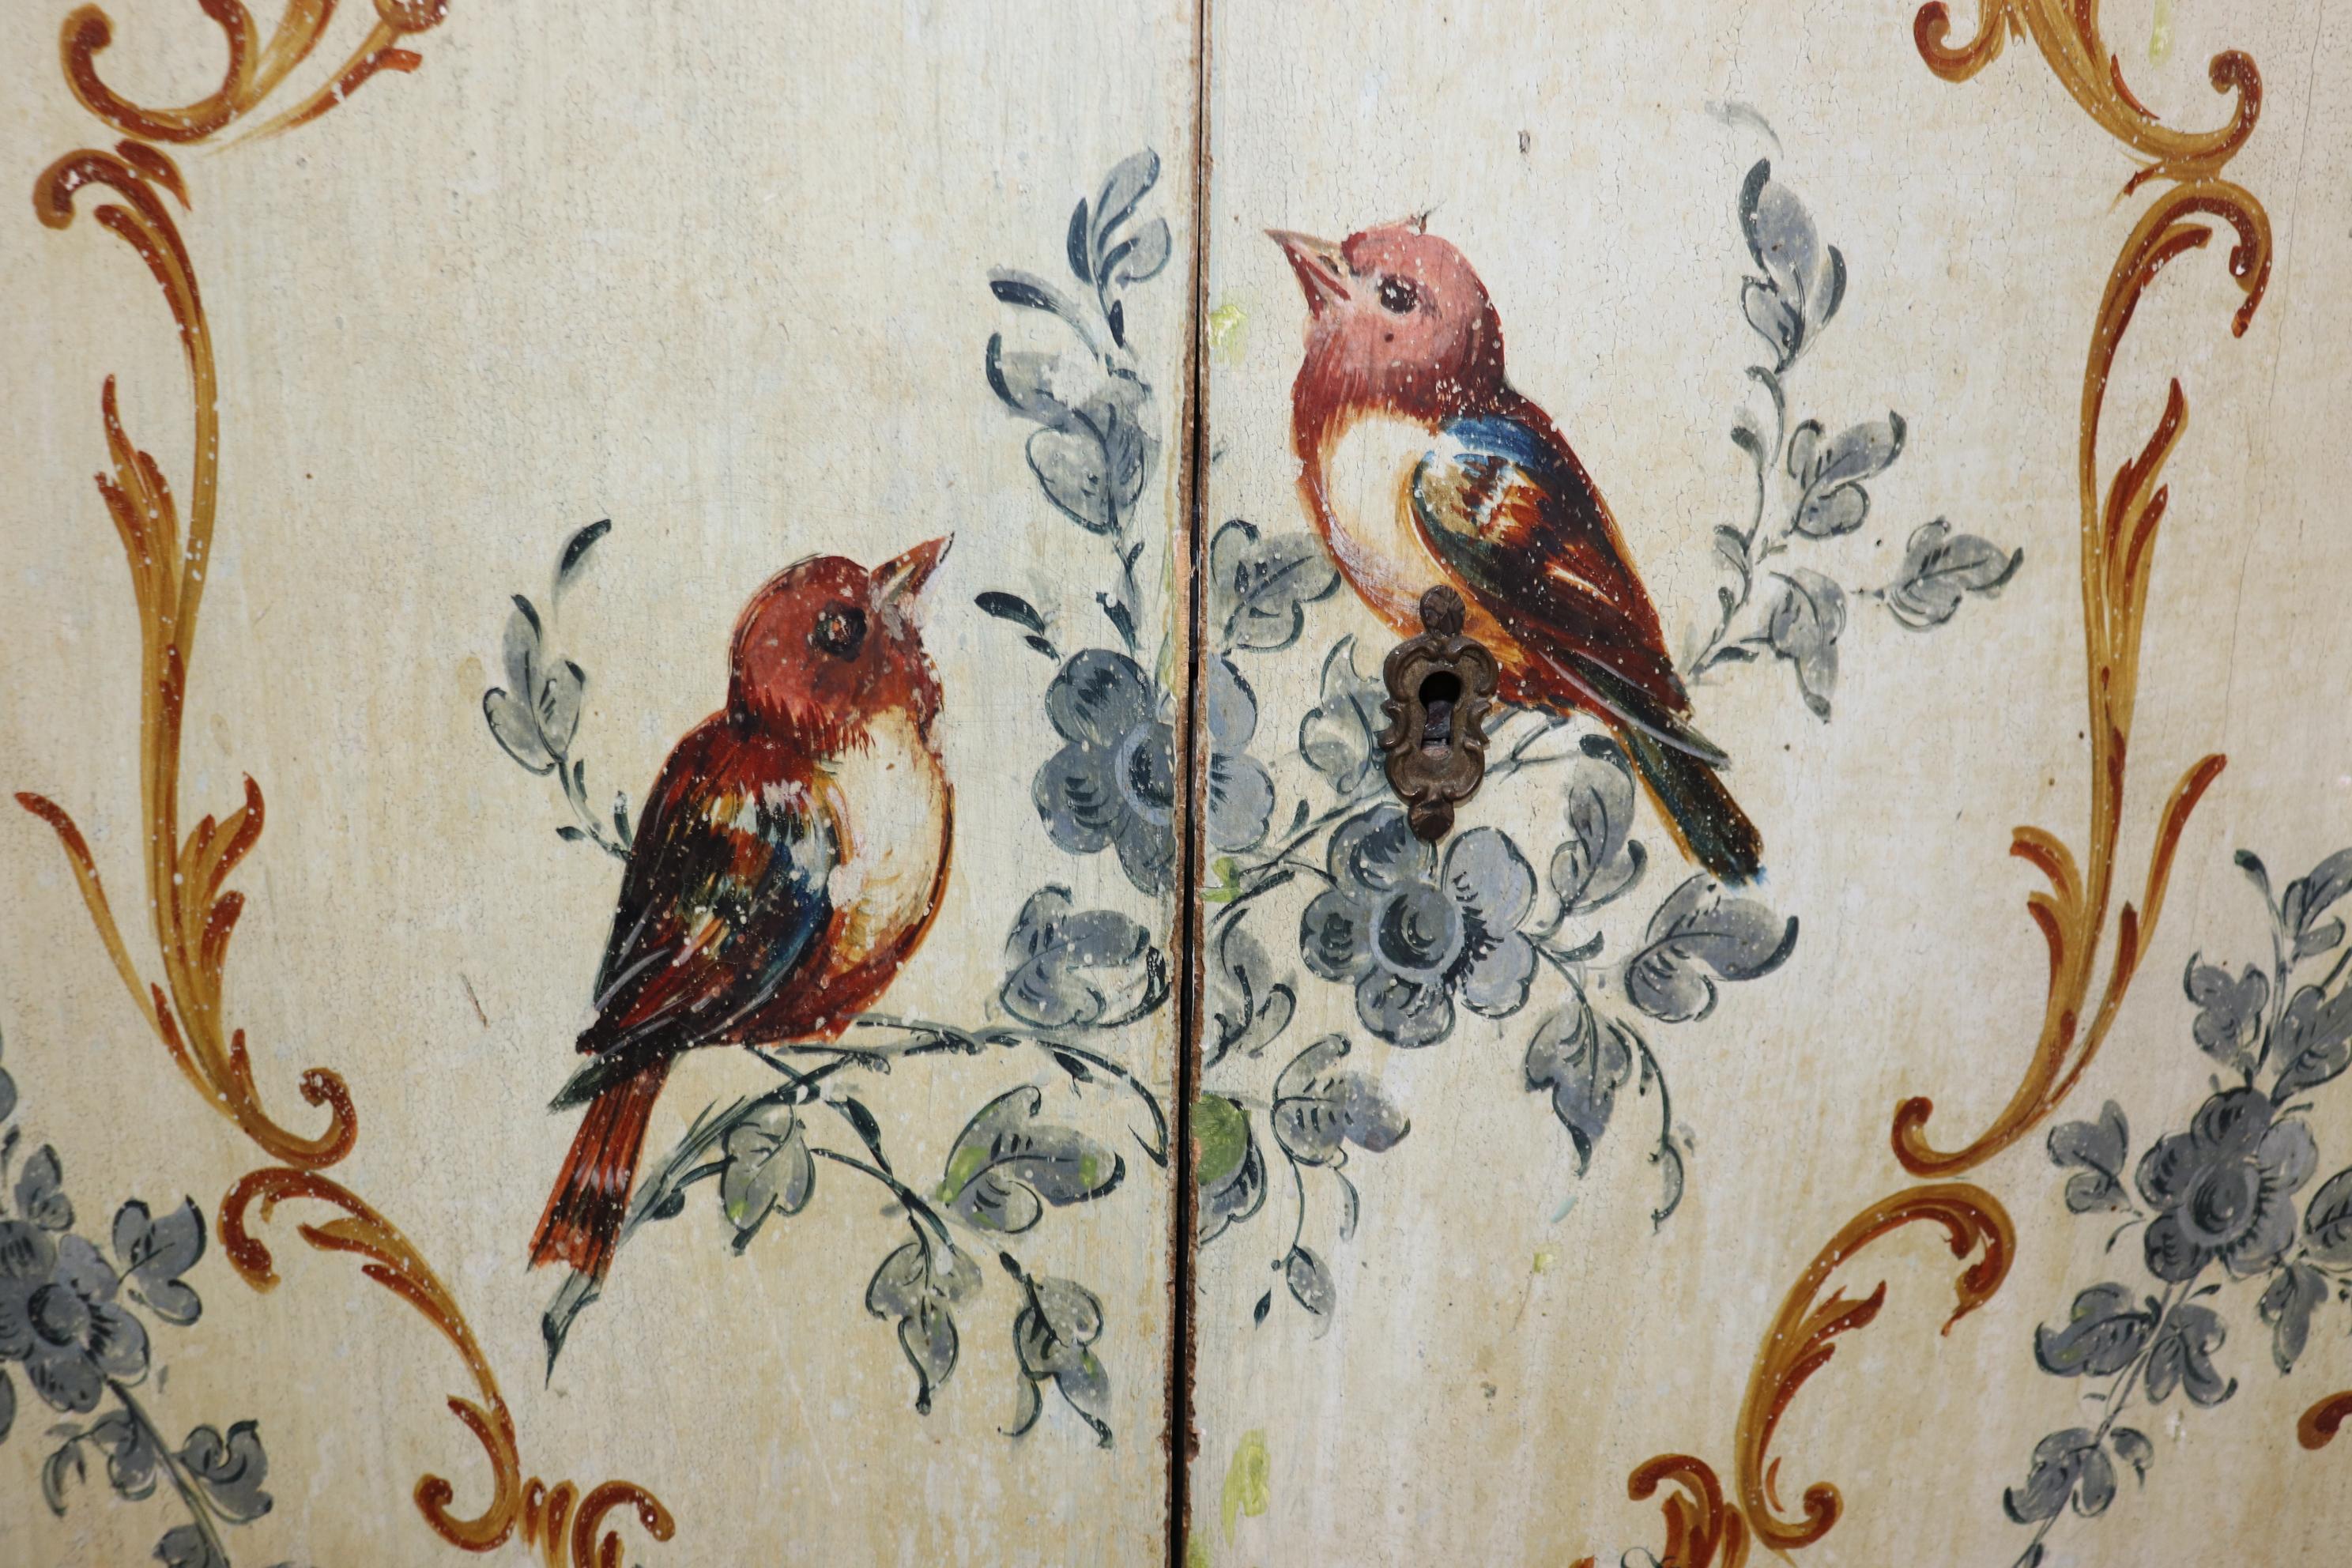 This is a gorgeous Venetian Paint Decorated with painted birds and floral foliage. The commode has a shelf in the center and the finish has that great time-worn distressed look. The commode measures 33.25 tall x 31.25 wide x 13.25 deep. Great for